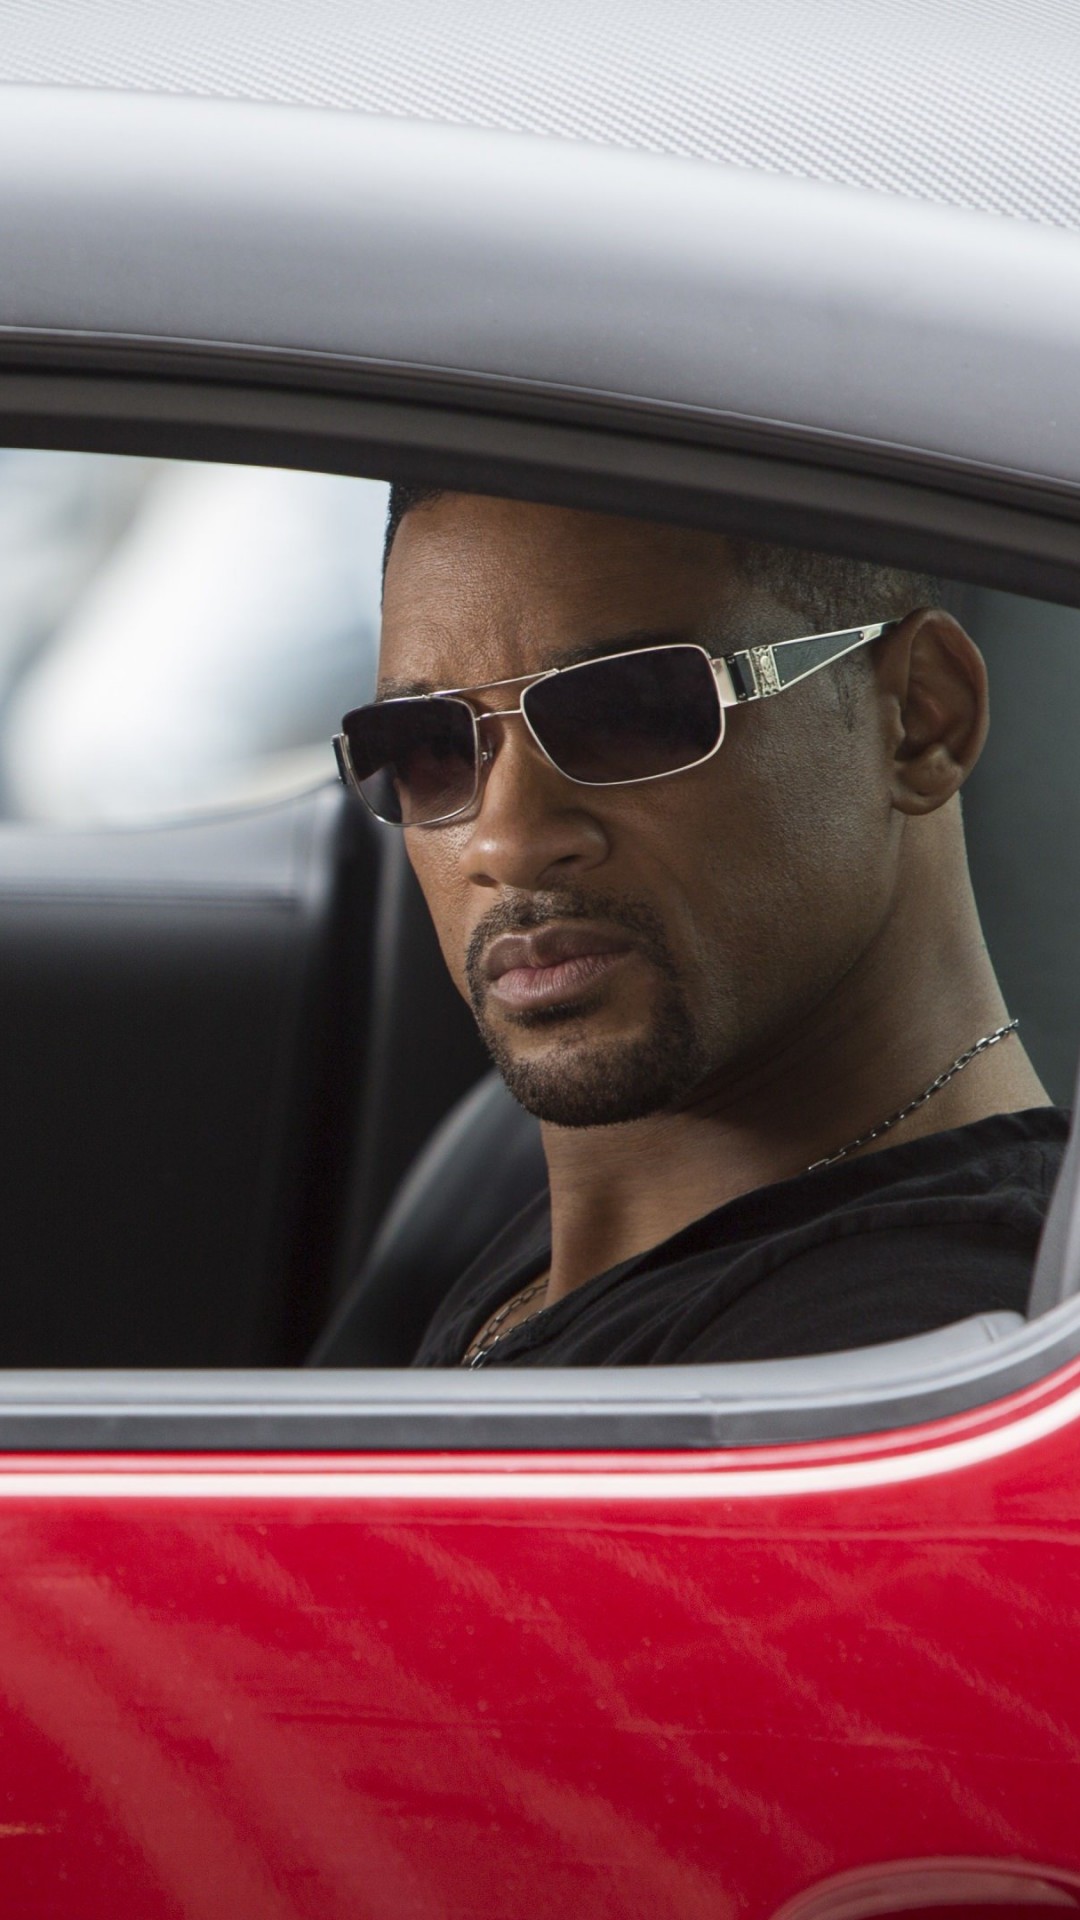 Will Smith at the shooting of "Focus" Wallpaper for Google Nexus 5